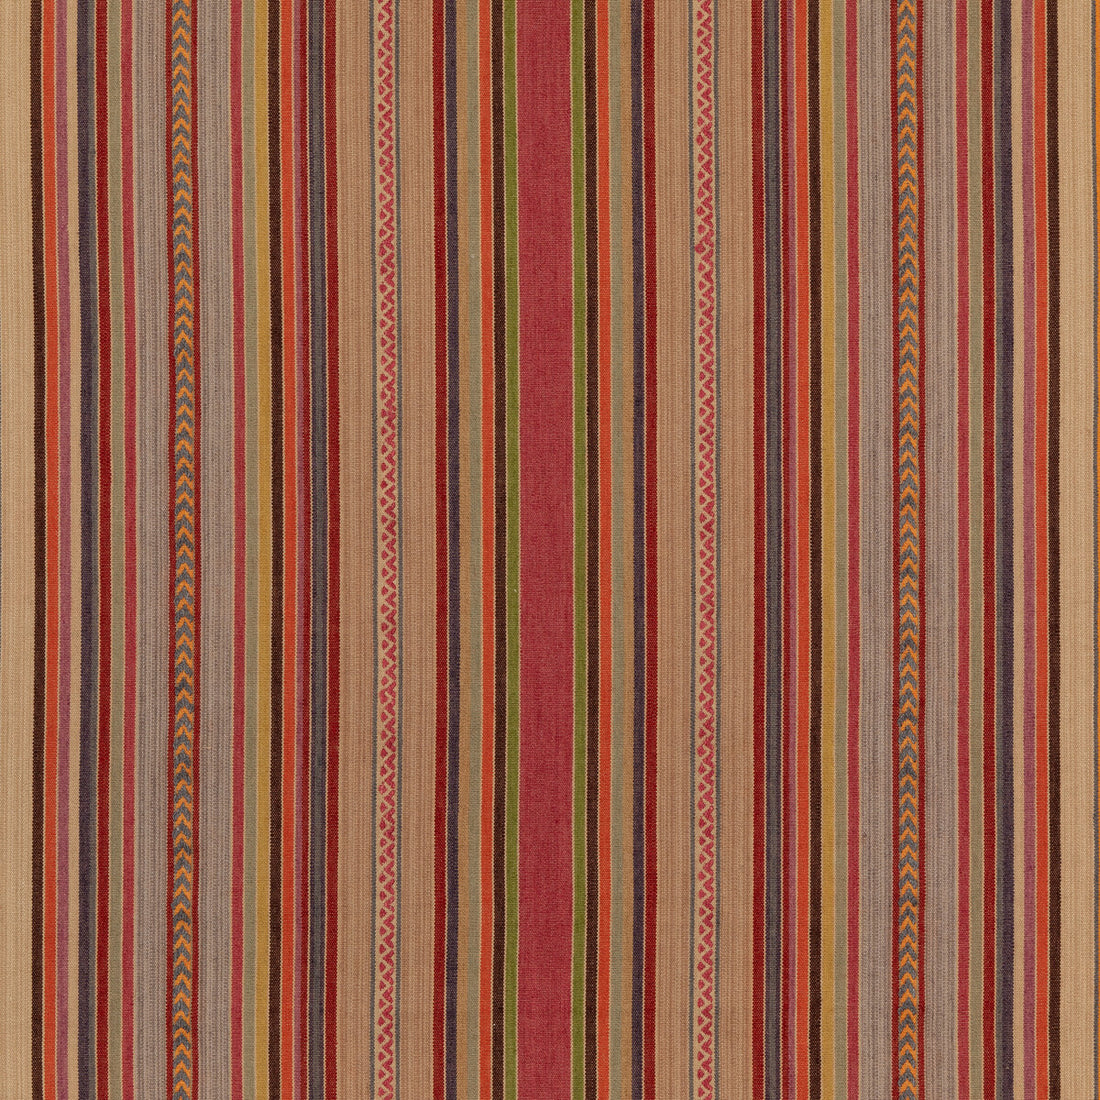 Art Stripe fabric in multi color - pattern FD783.Y101.0 - by Mulberry in the Modern Country II collection